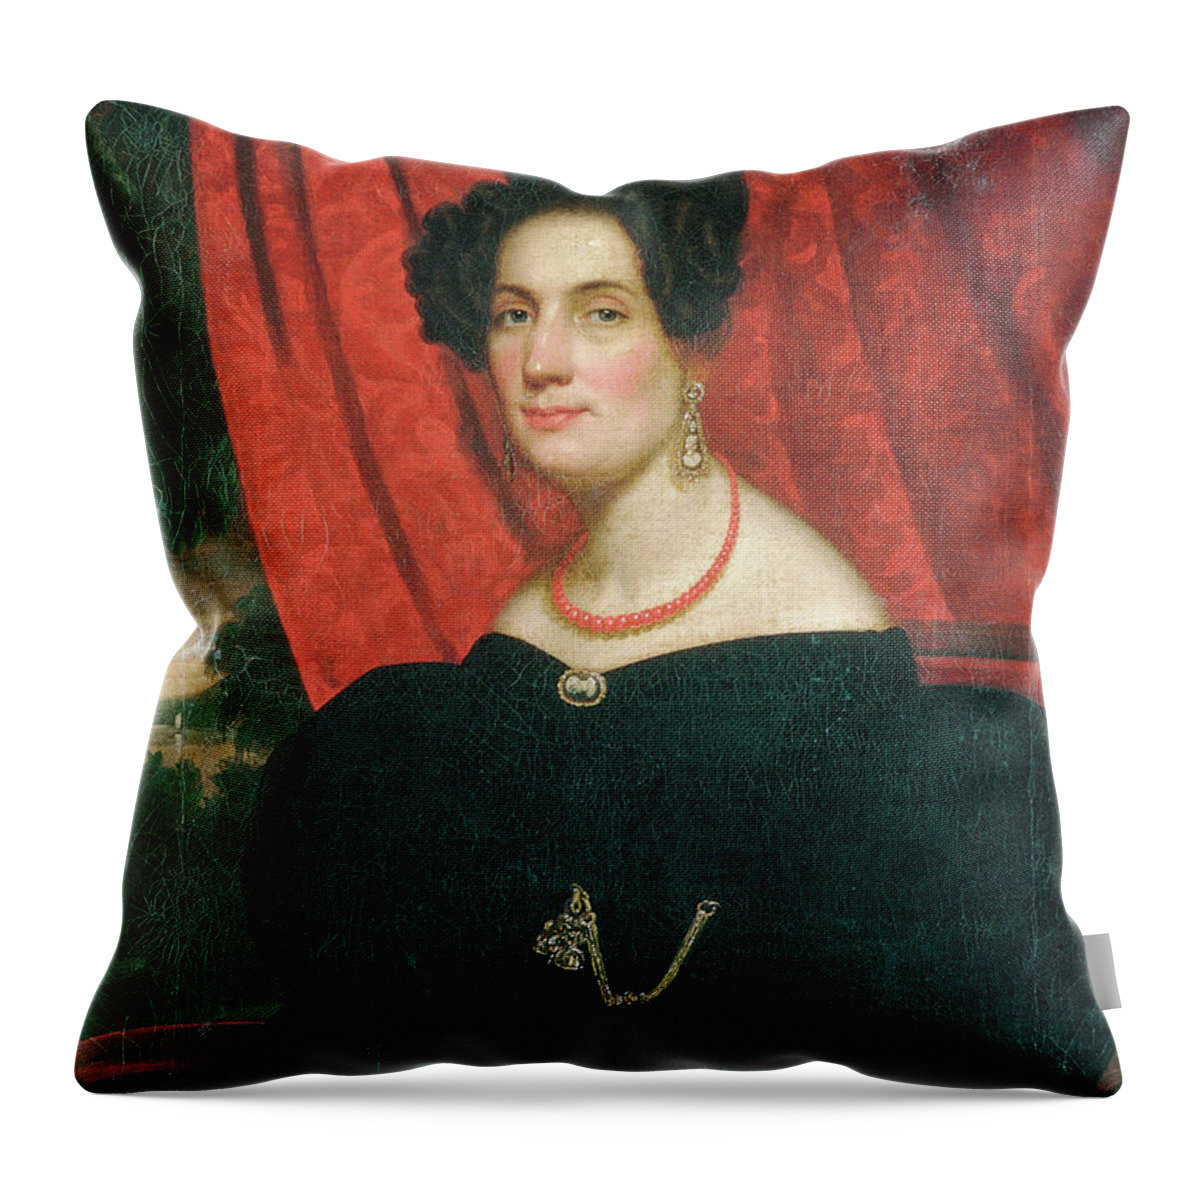 Figurative Throw Pillow featuring the painting Mary Ann Garrits 1834 by Frederick R Spencer